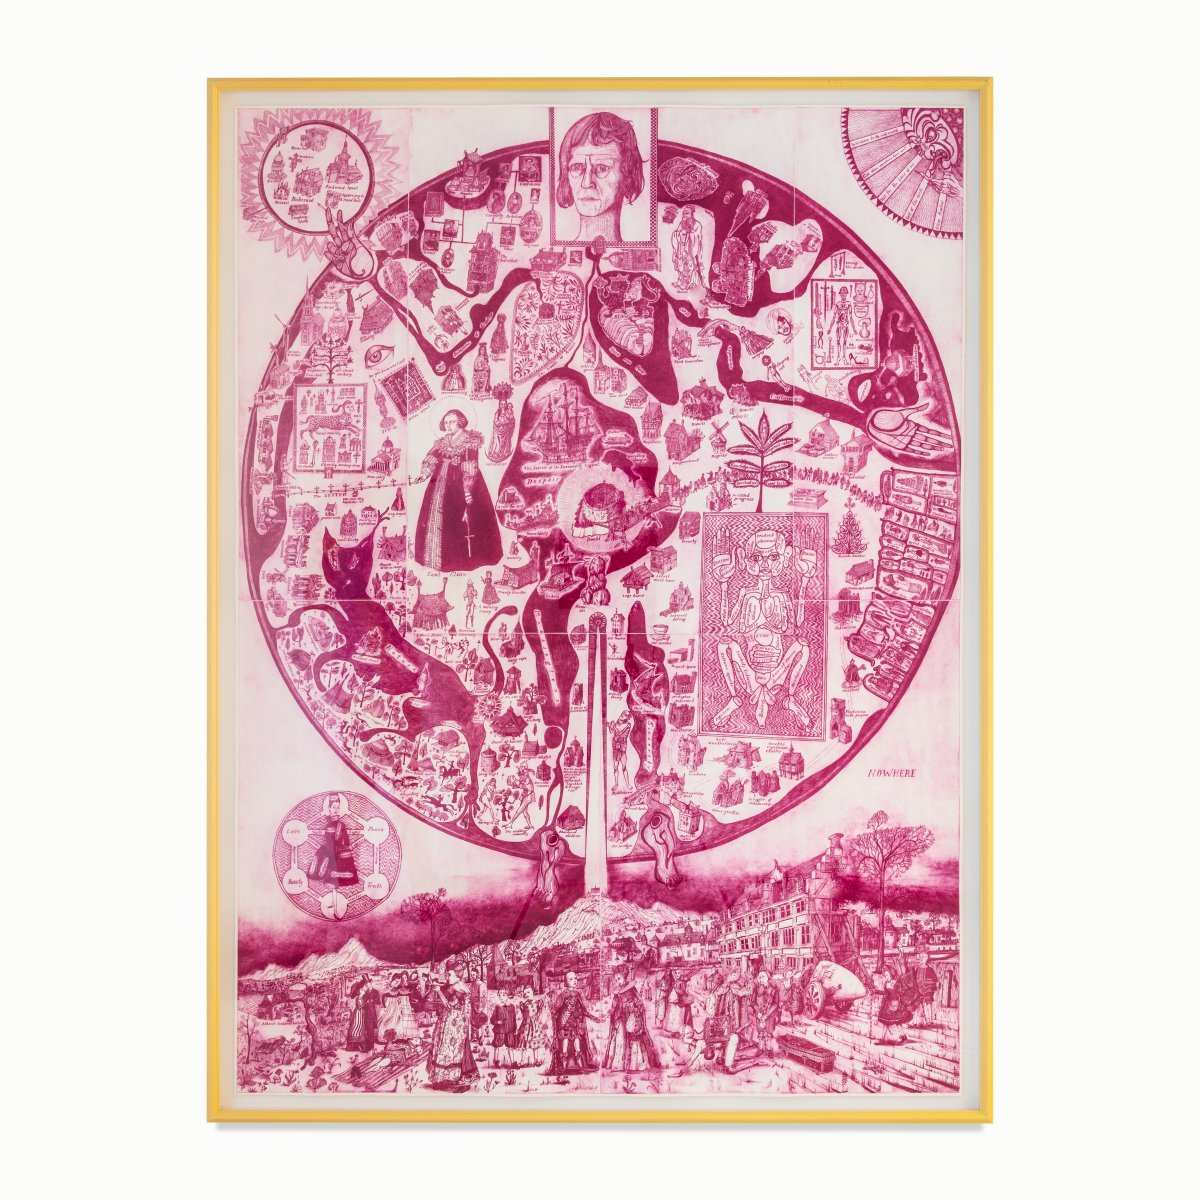 Grayson Perry, Map of Nowhere (purple), 2008